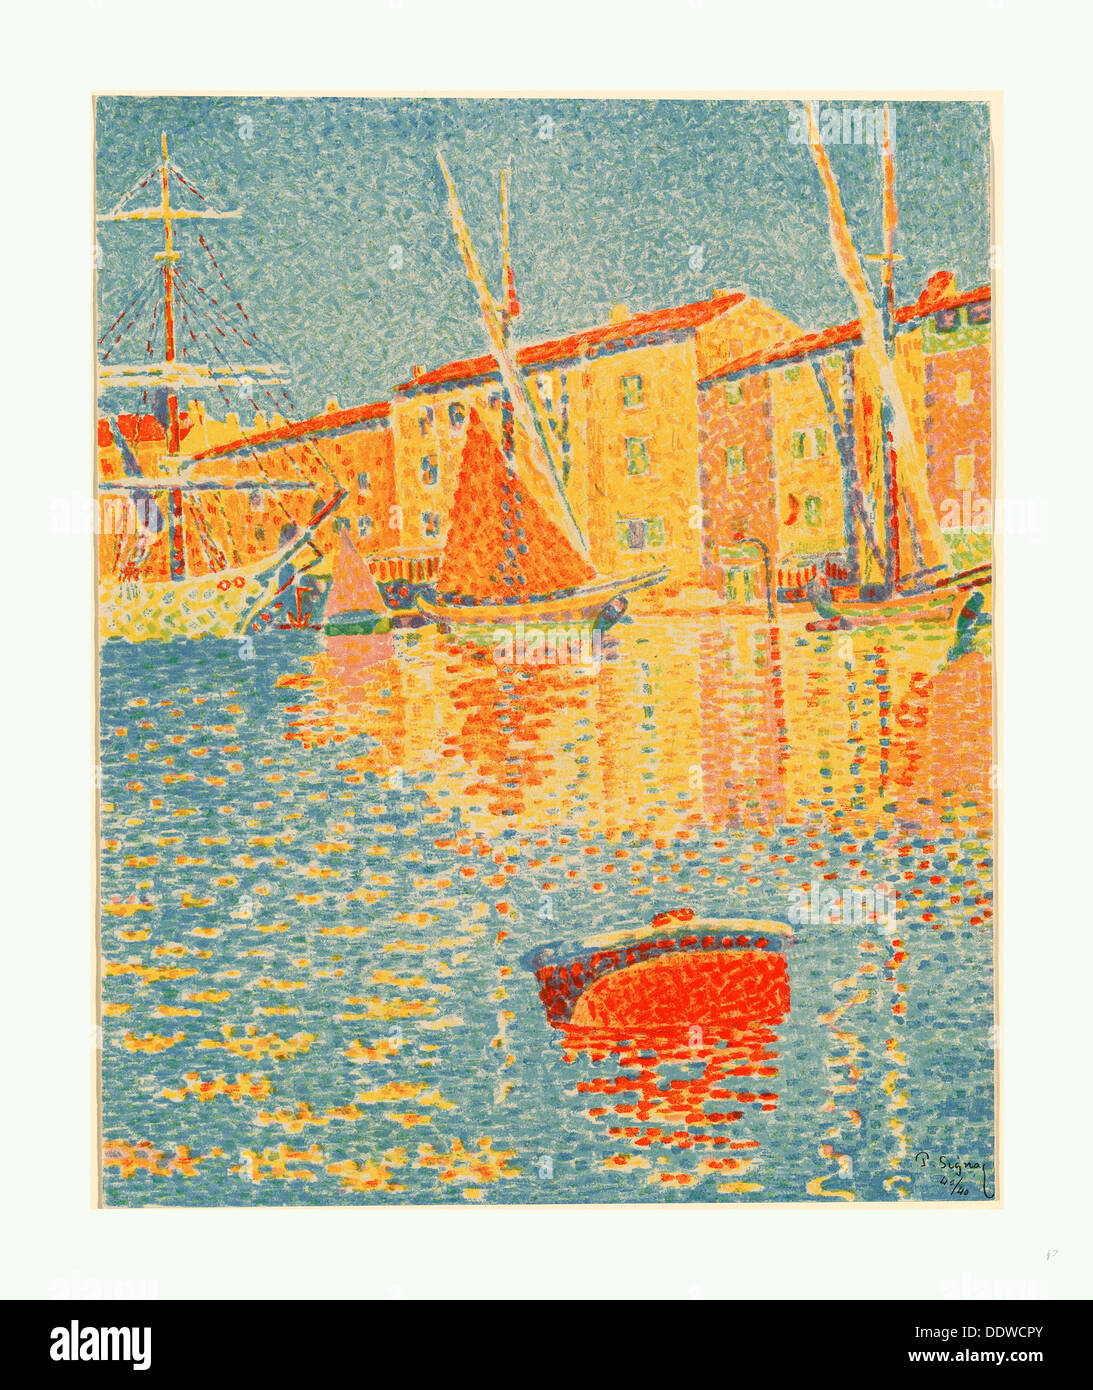 Paul Signac (French, 1863 - 1935 ), The Buoy (La bouee), 1894, color lithograph Stock Photo